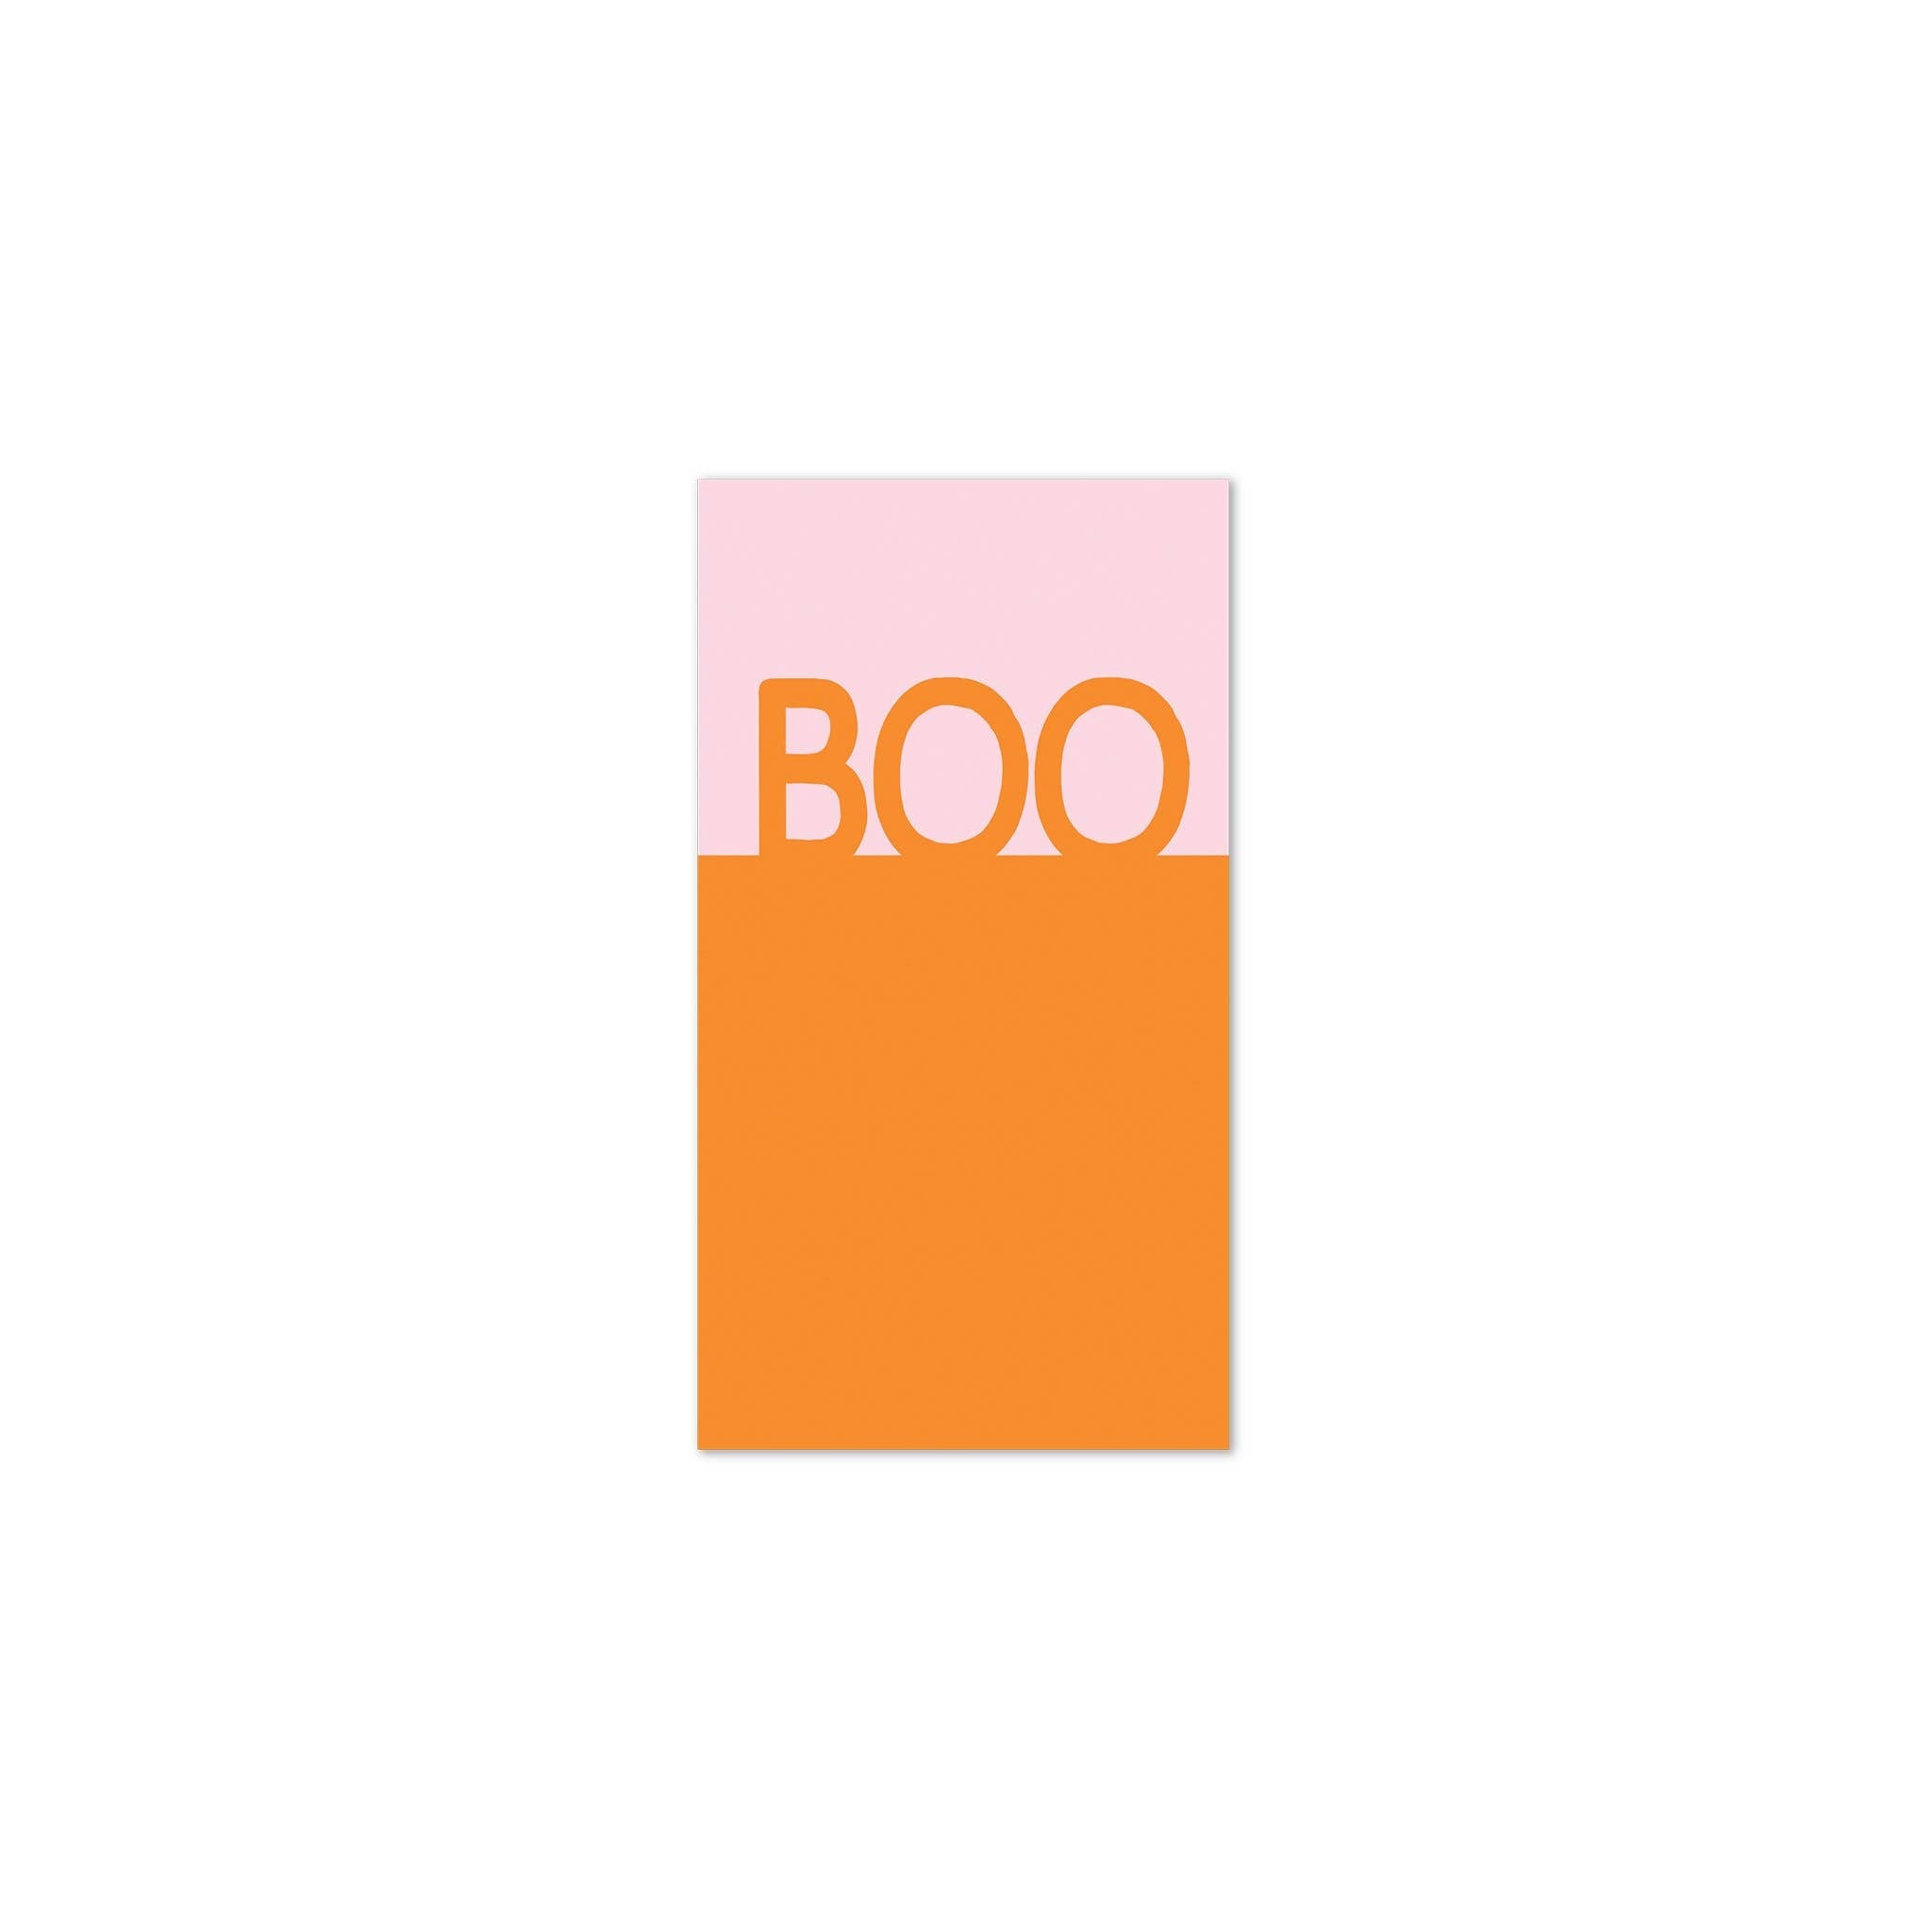 Happy Haunting Boo Paper Napkins by My Mind’s Eye. Halloween napkins. "BOO" napkins. Pink halloween napkins. Pastel pink halloween decor. Paper napkins for halloween party. Girly halloween decor.